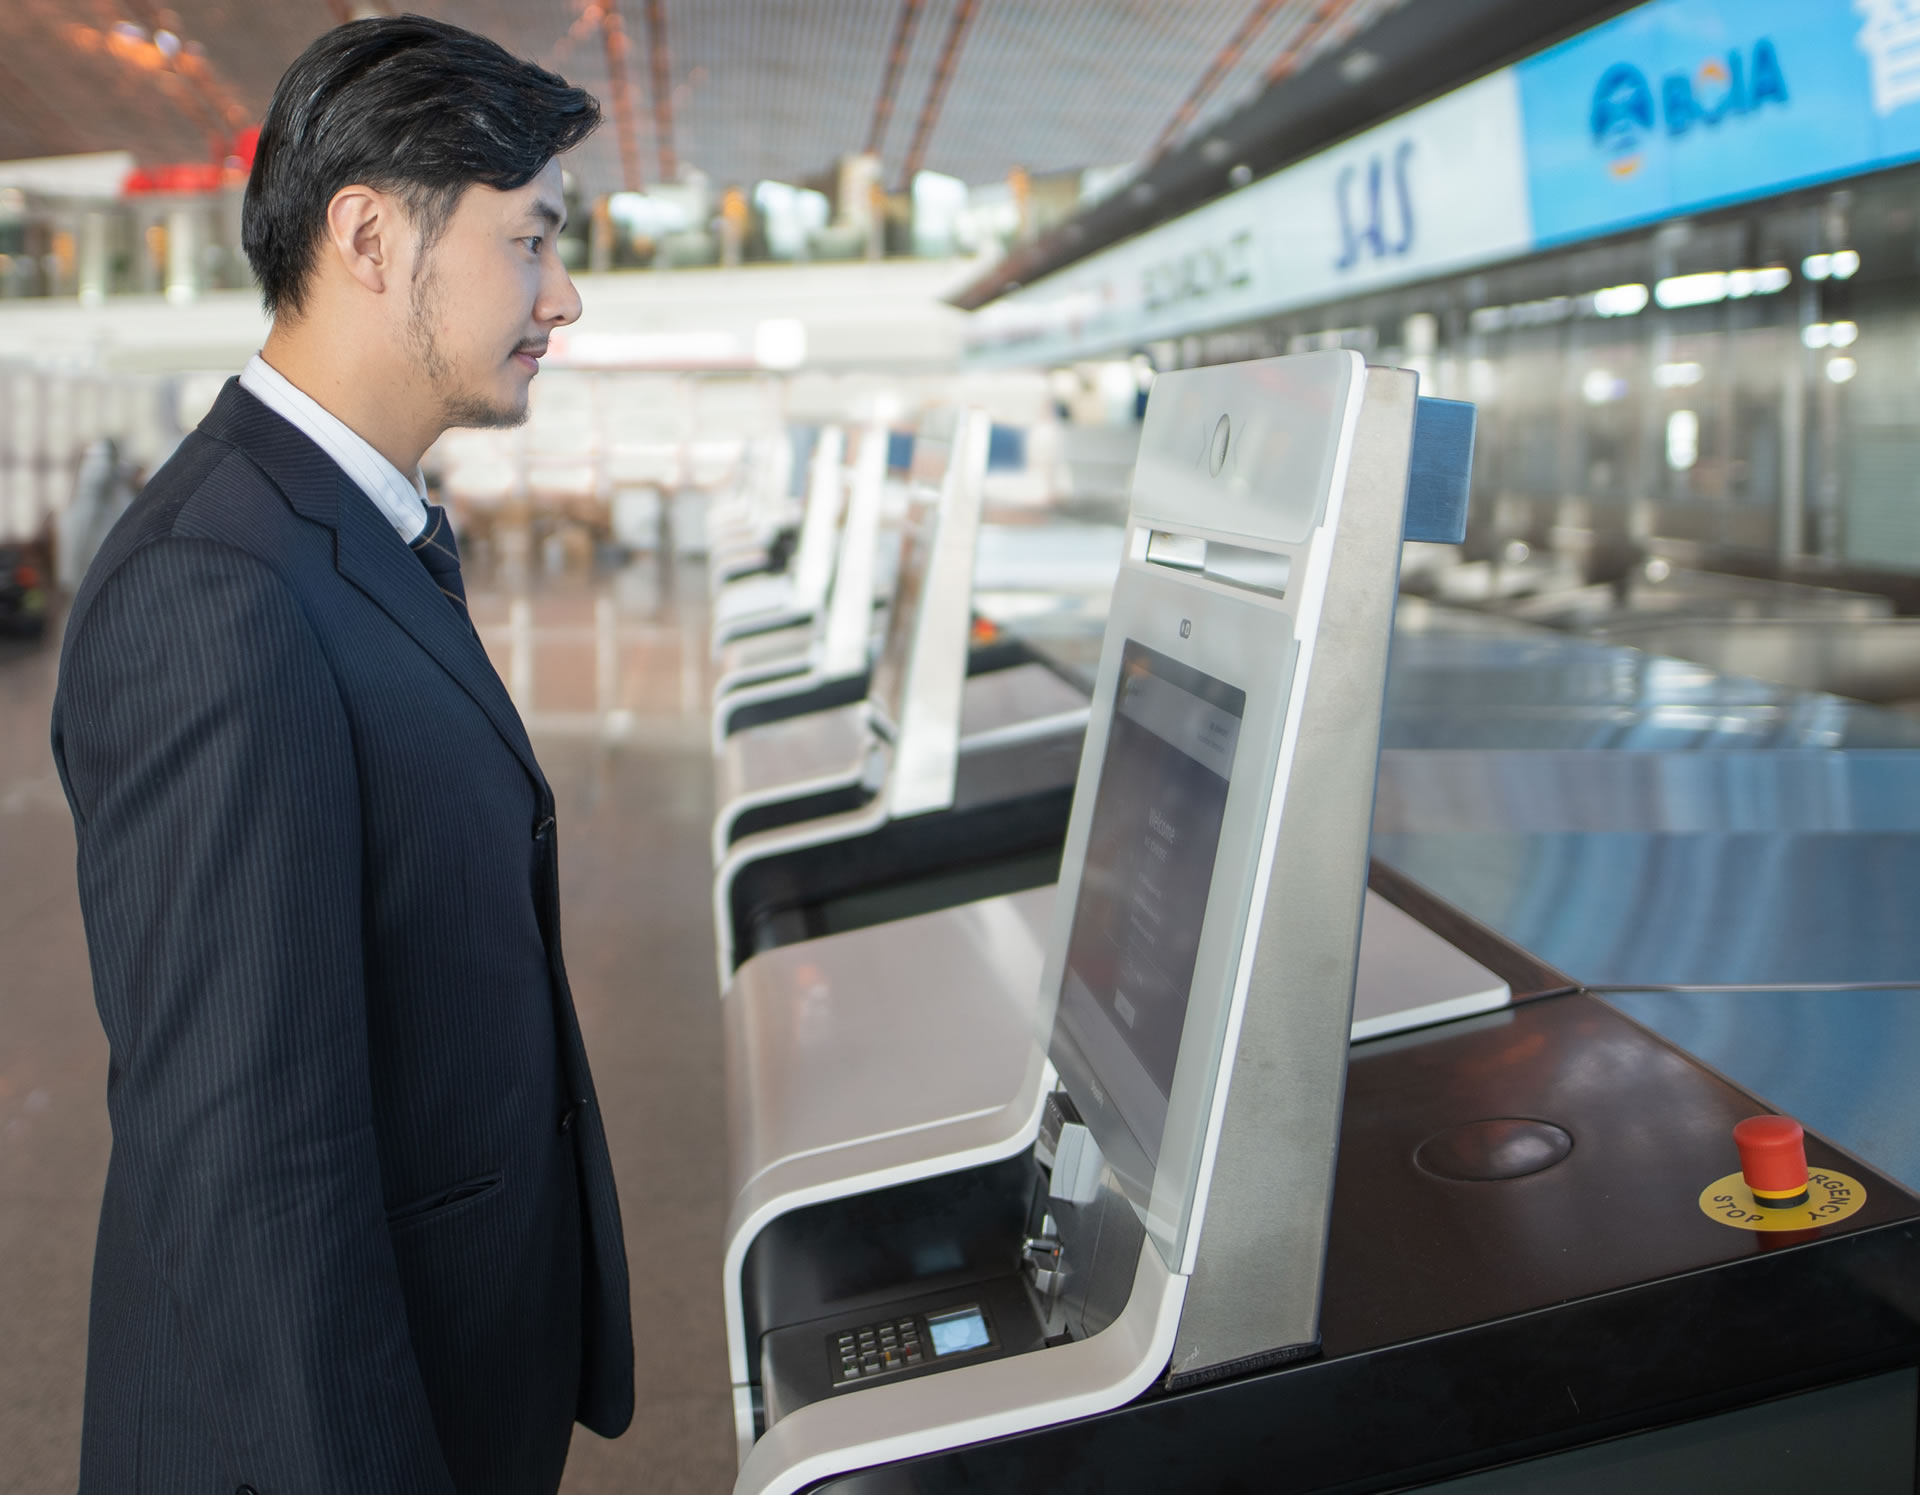 Bristol Airport launches new self-service bag drop technology